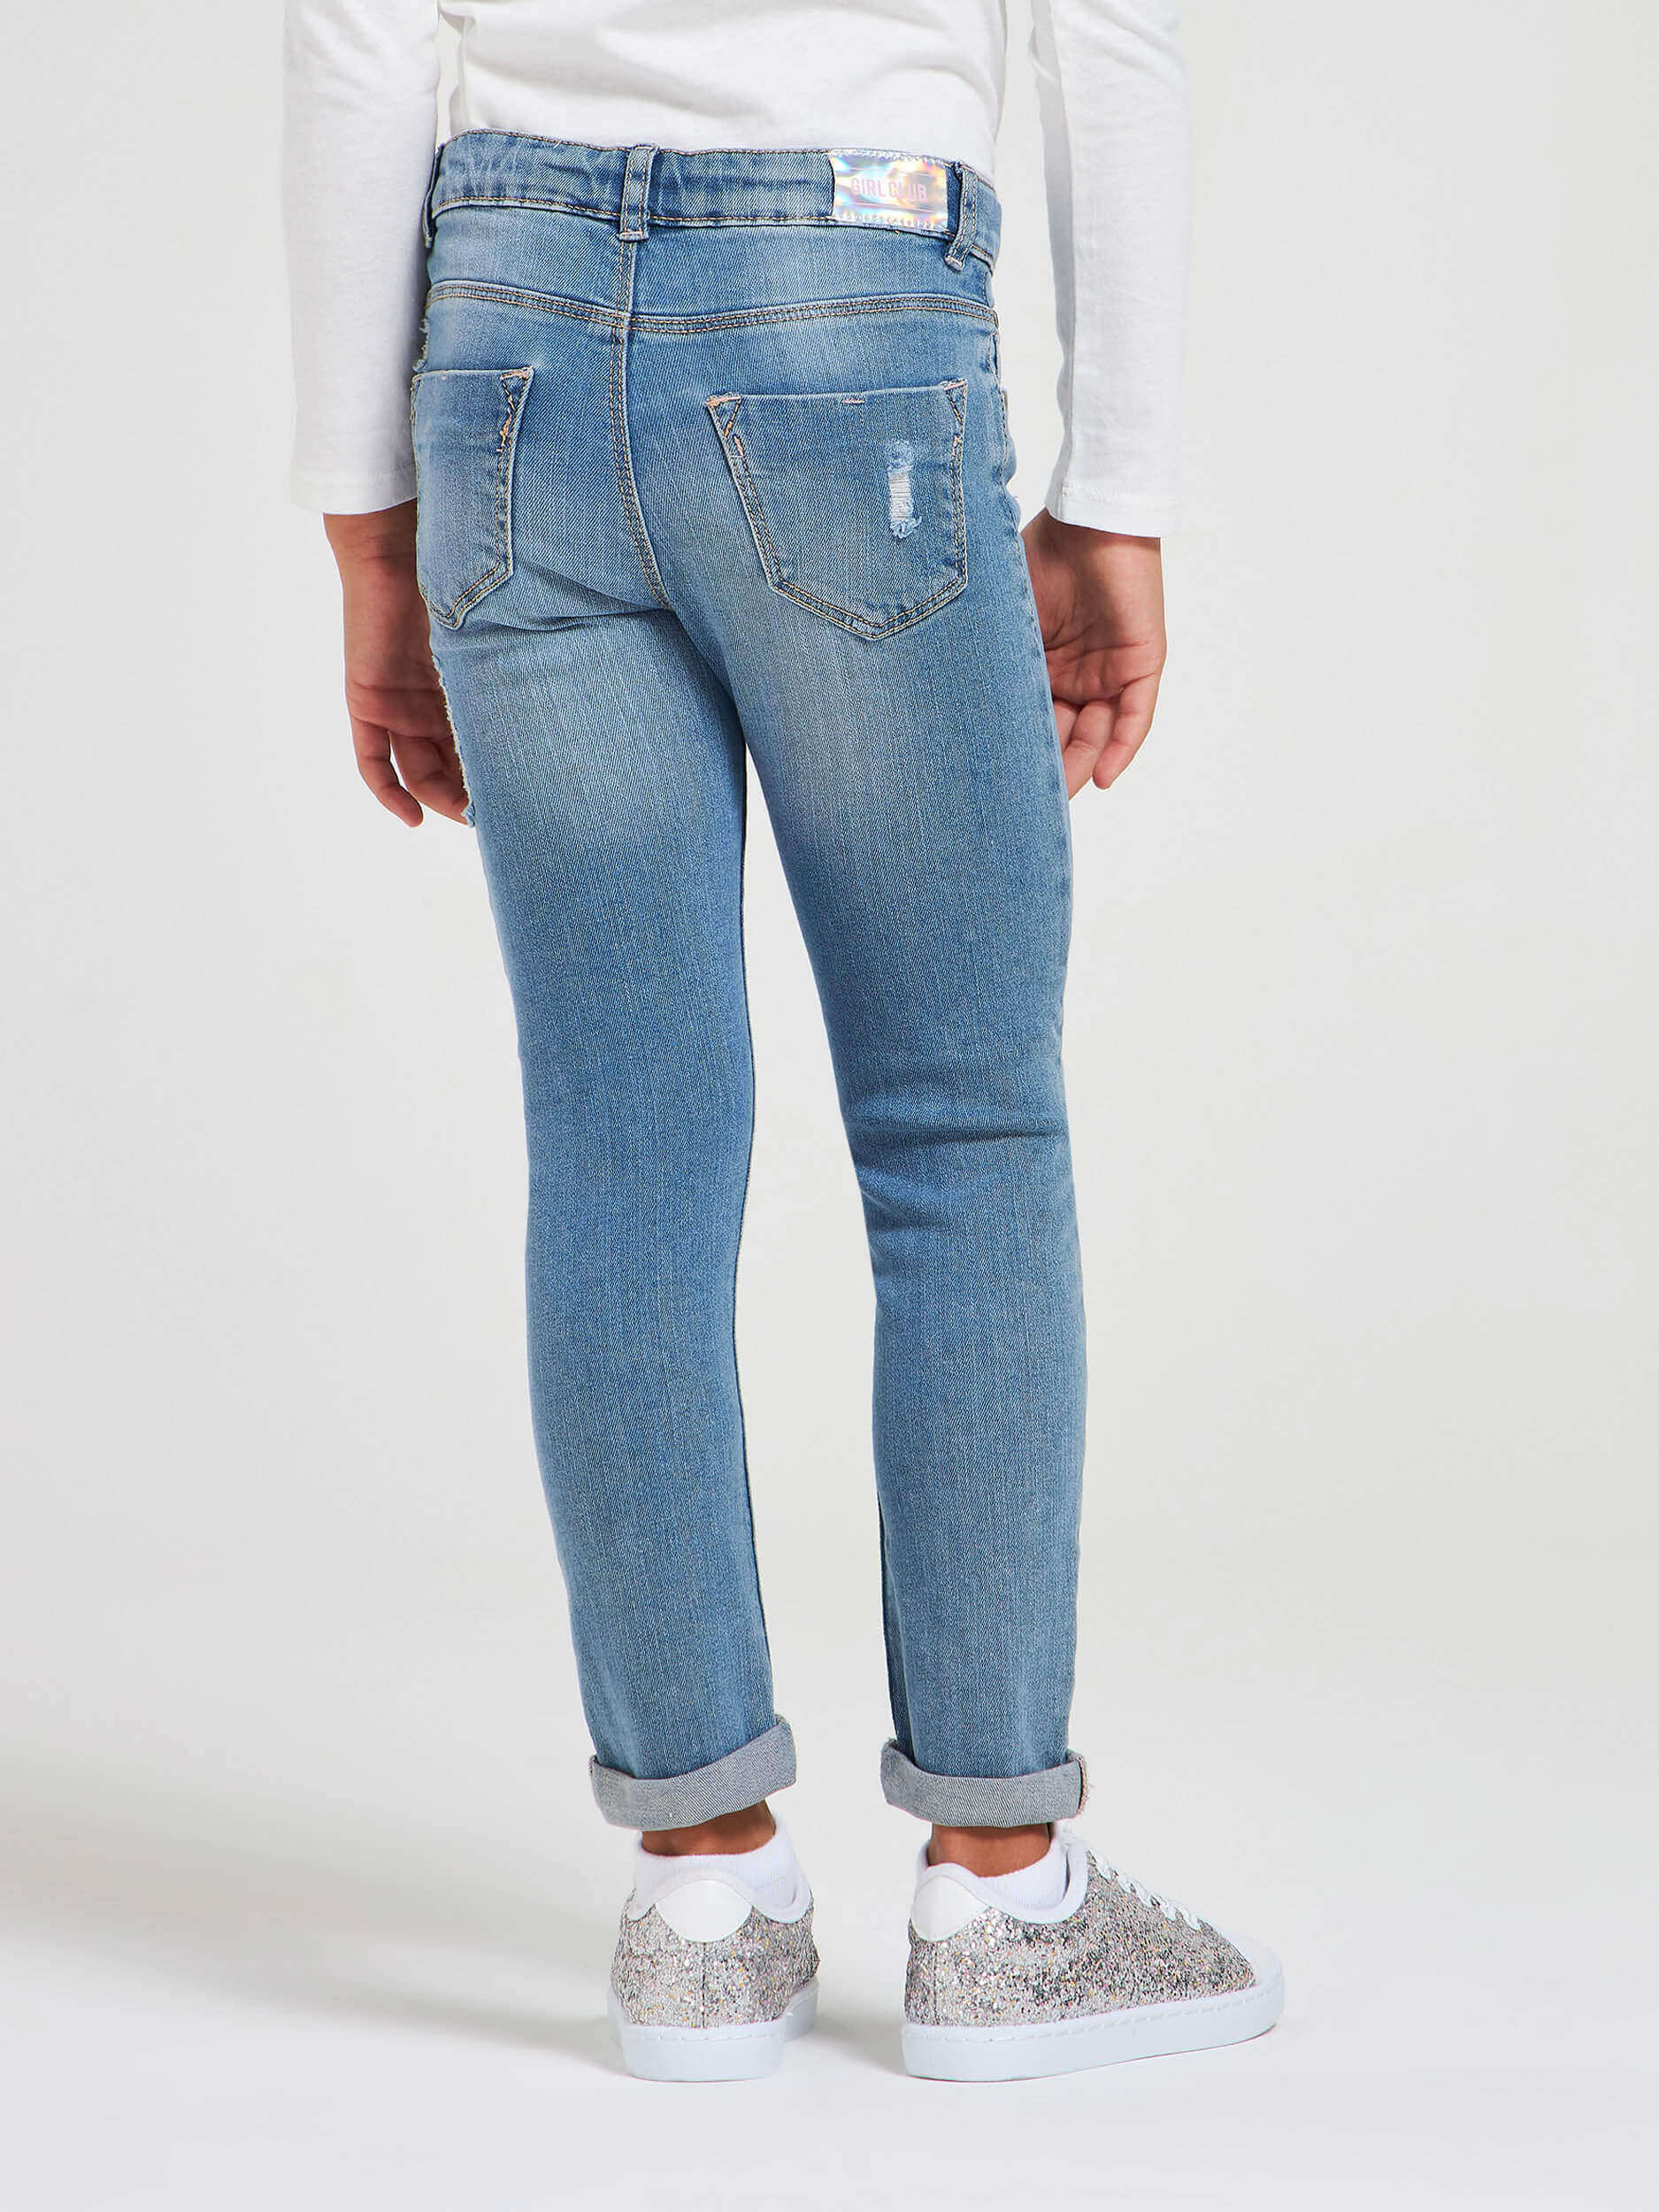 ripped jeans buy online